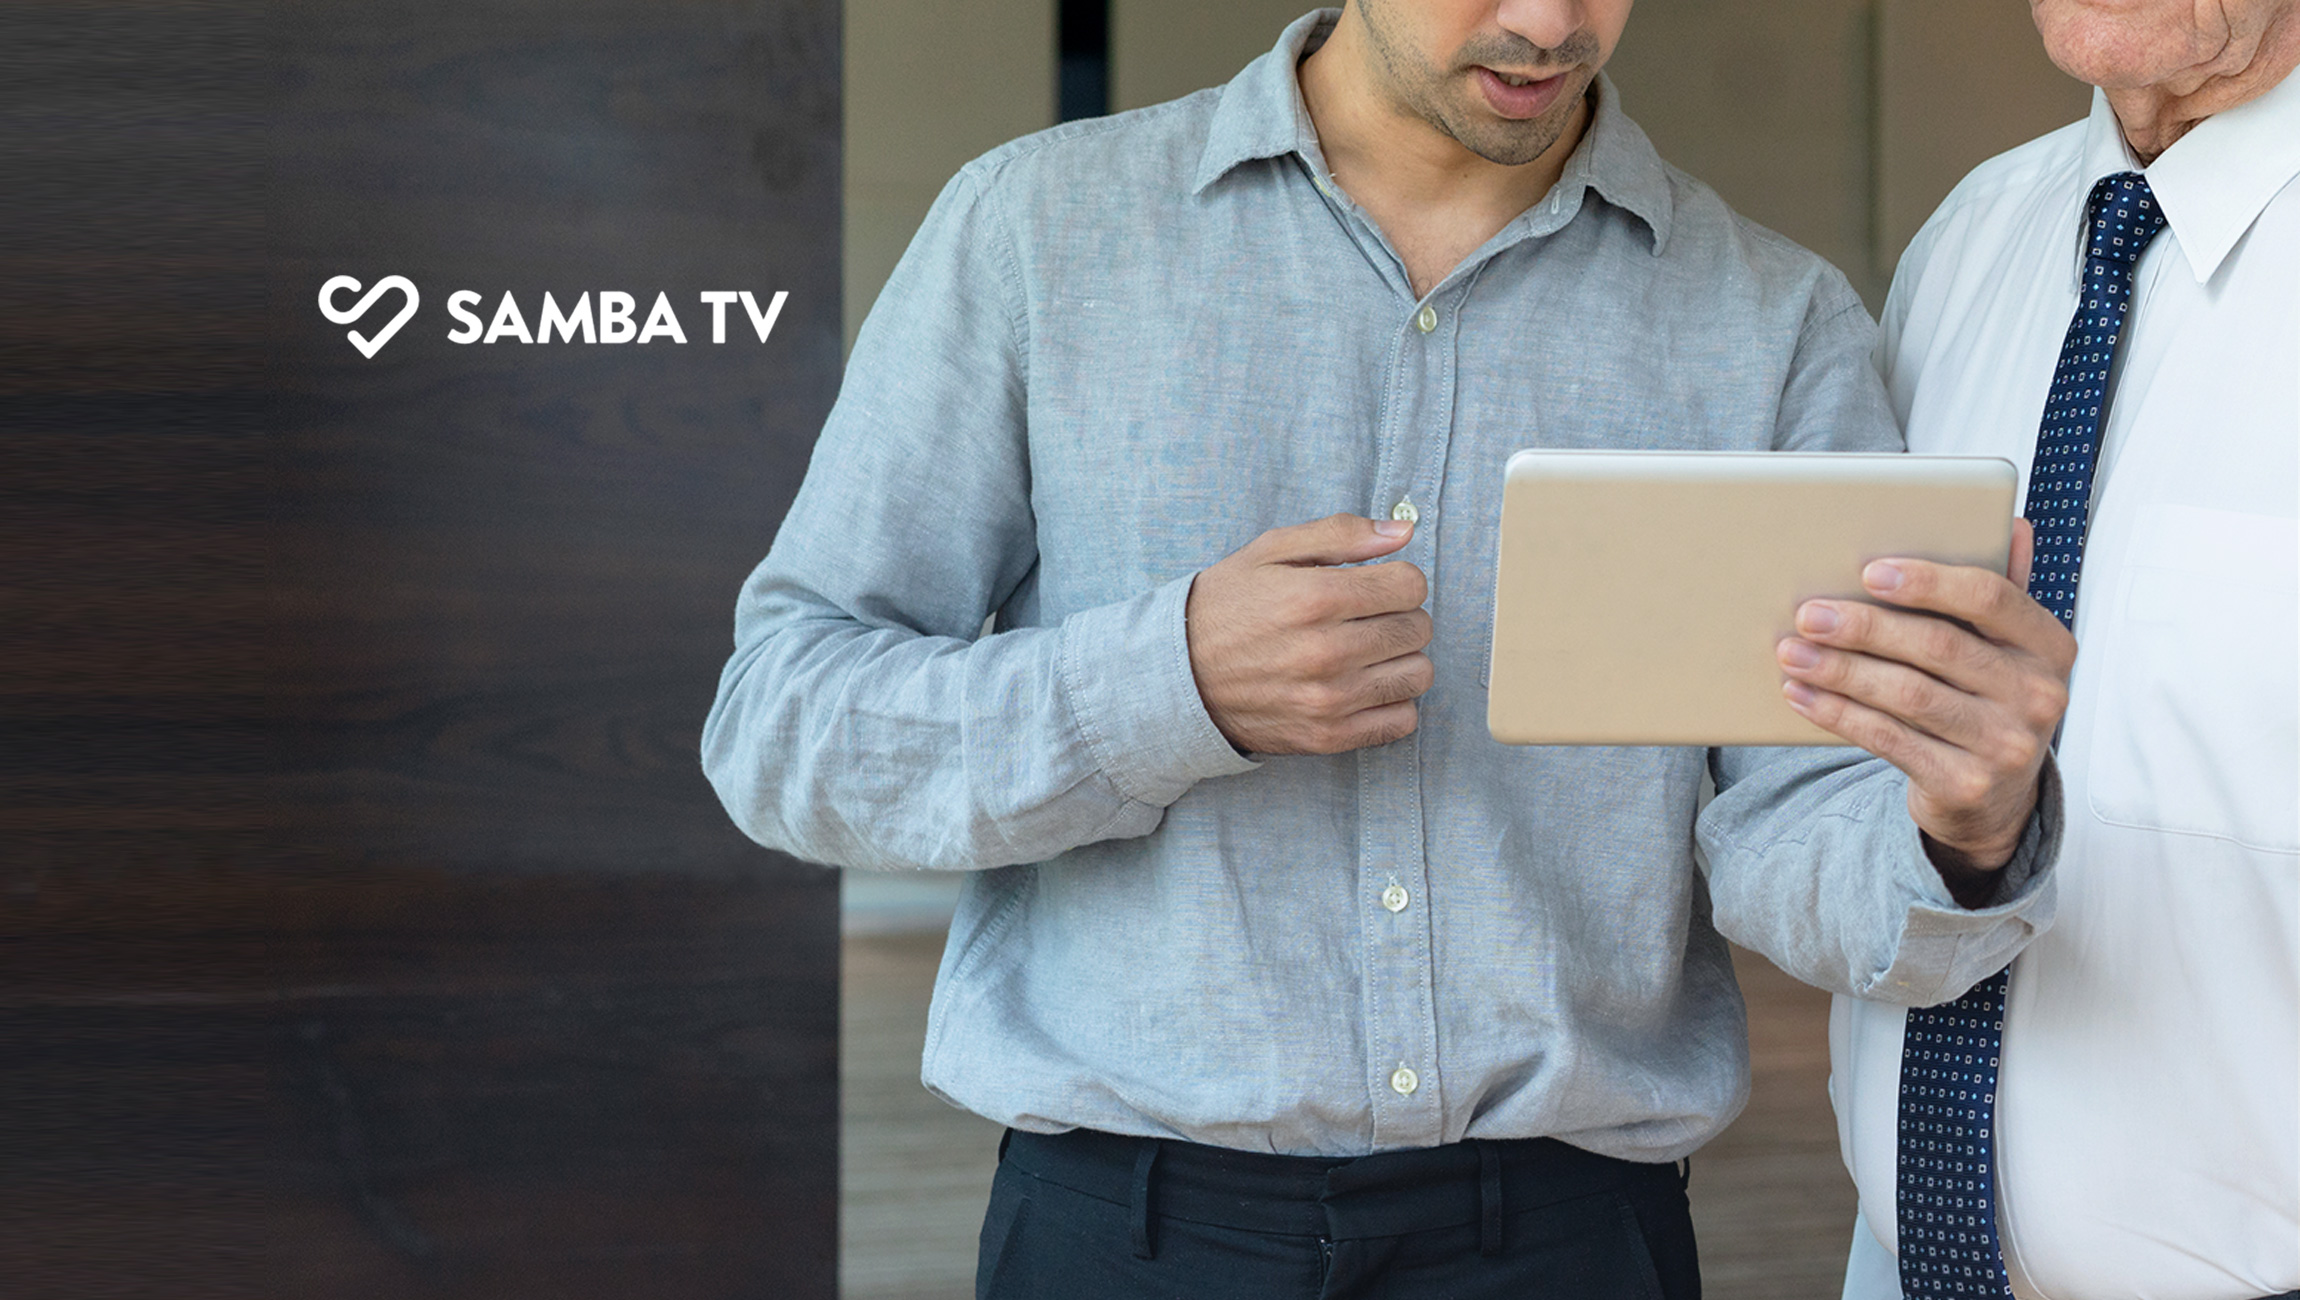 Samba TV’s Tune-In Measurement Solution is Now Available in Google Marketing Platform